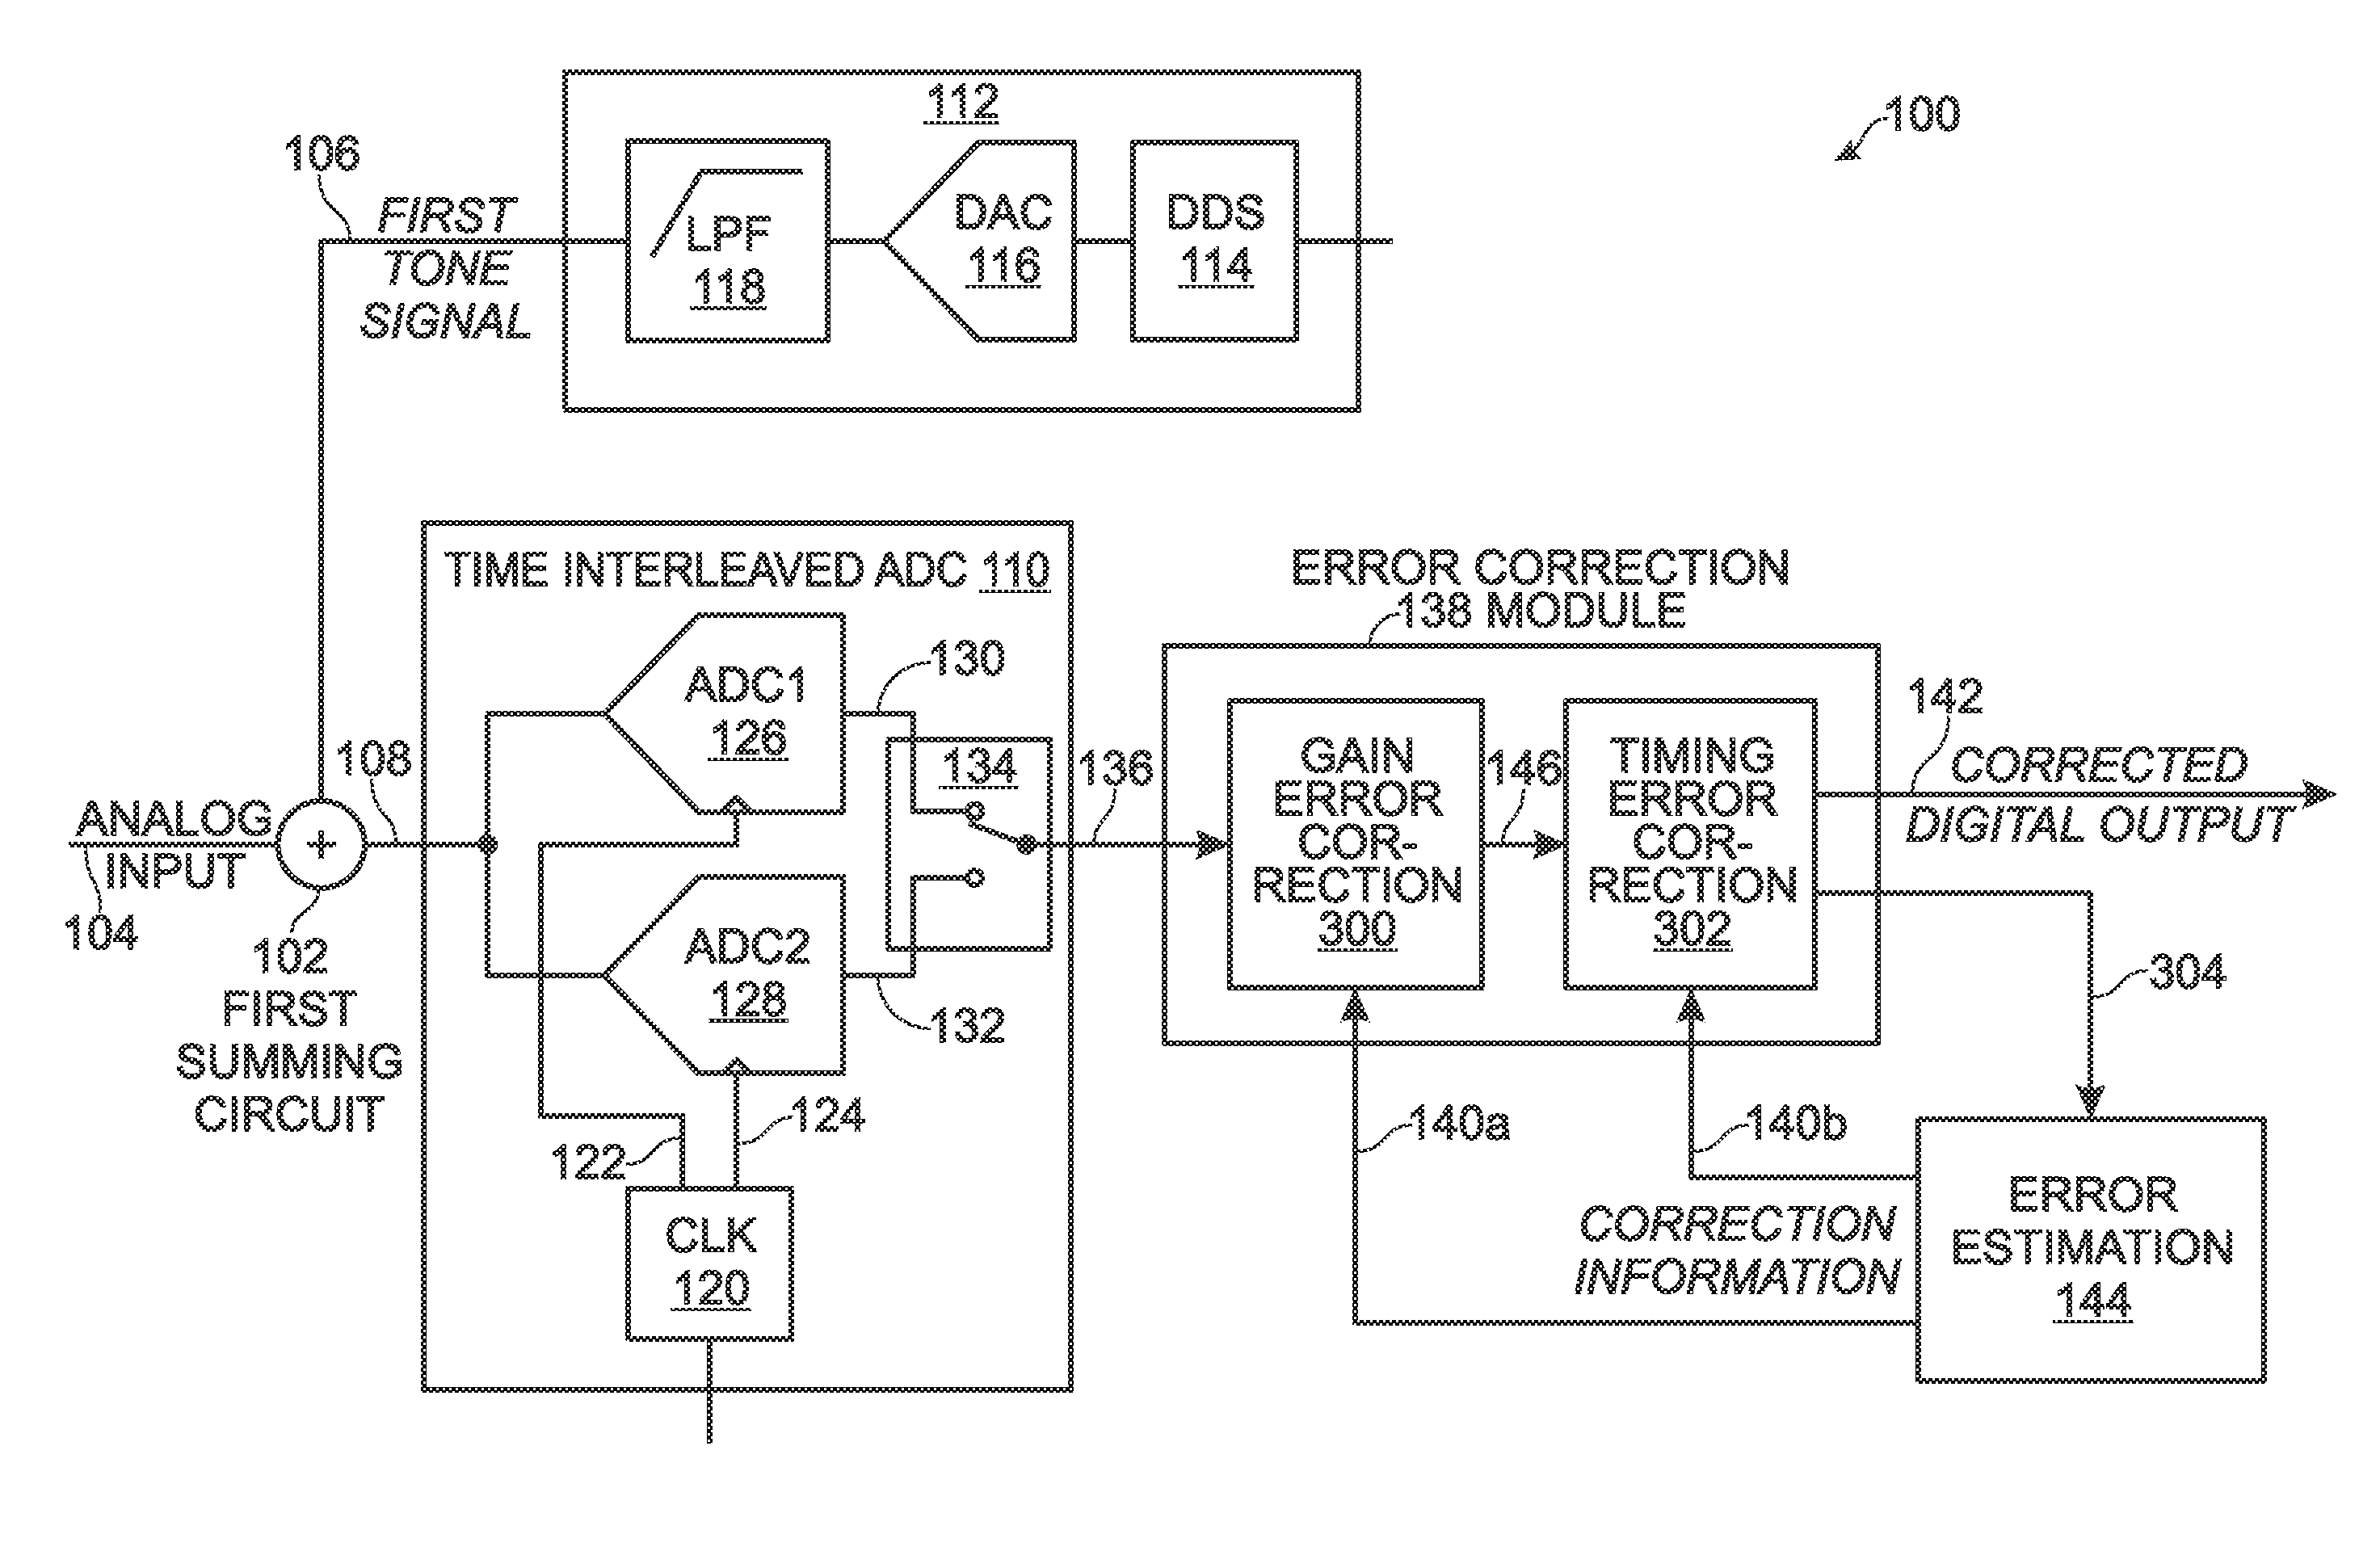 Interleaving analog-to-digital converter (ADC) with background calibration